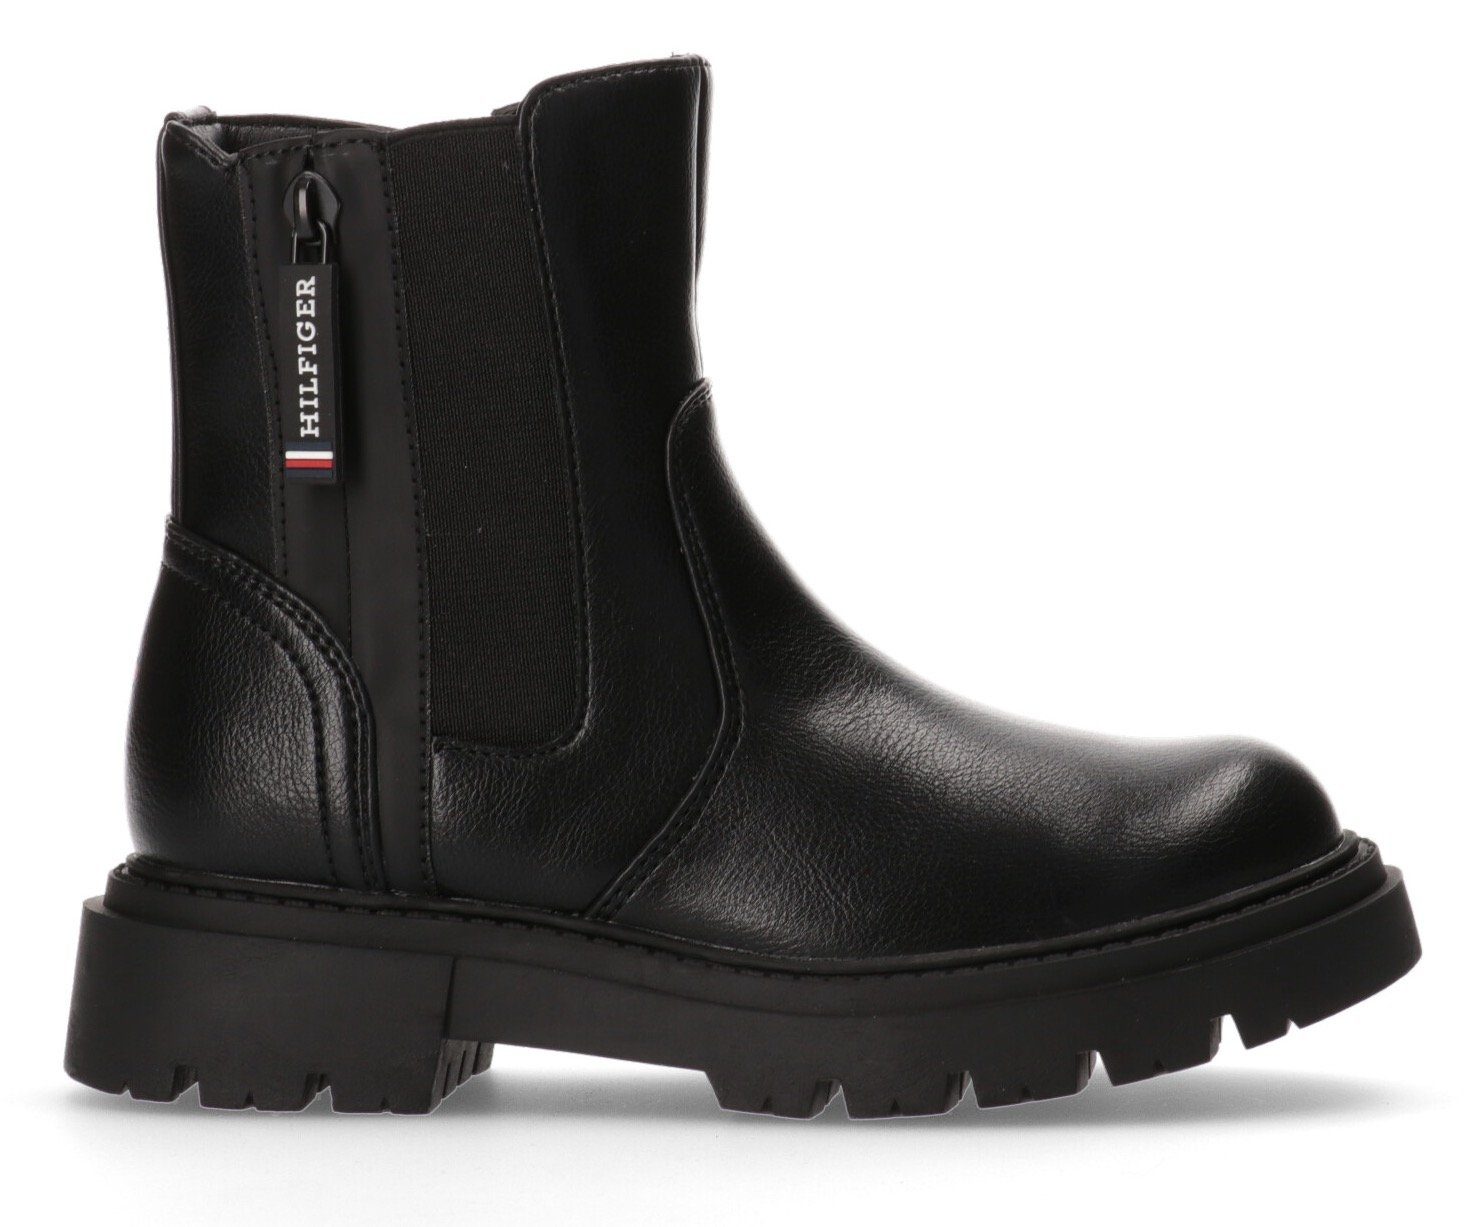 Tommy Hilfiger CHELSEA BOOT Chelseaboots modischer Plateausohle mit